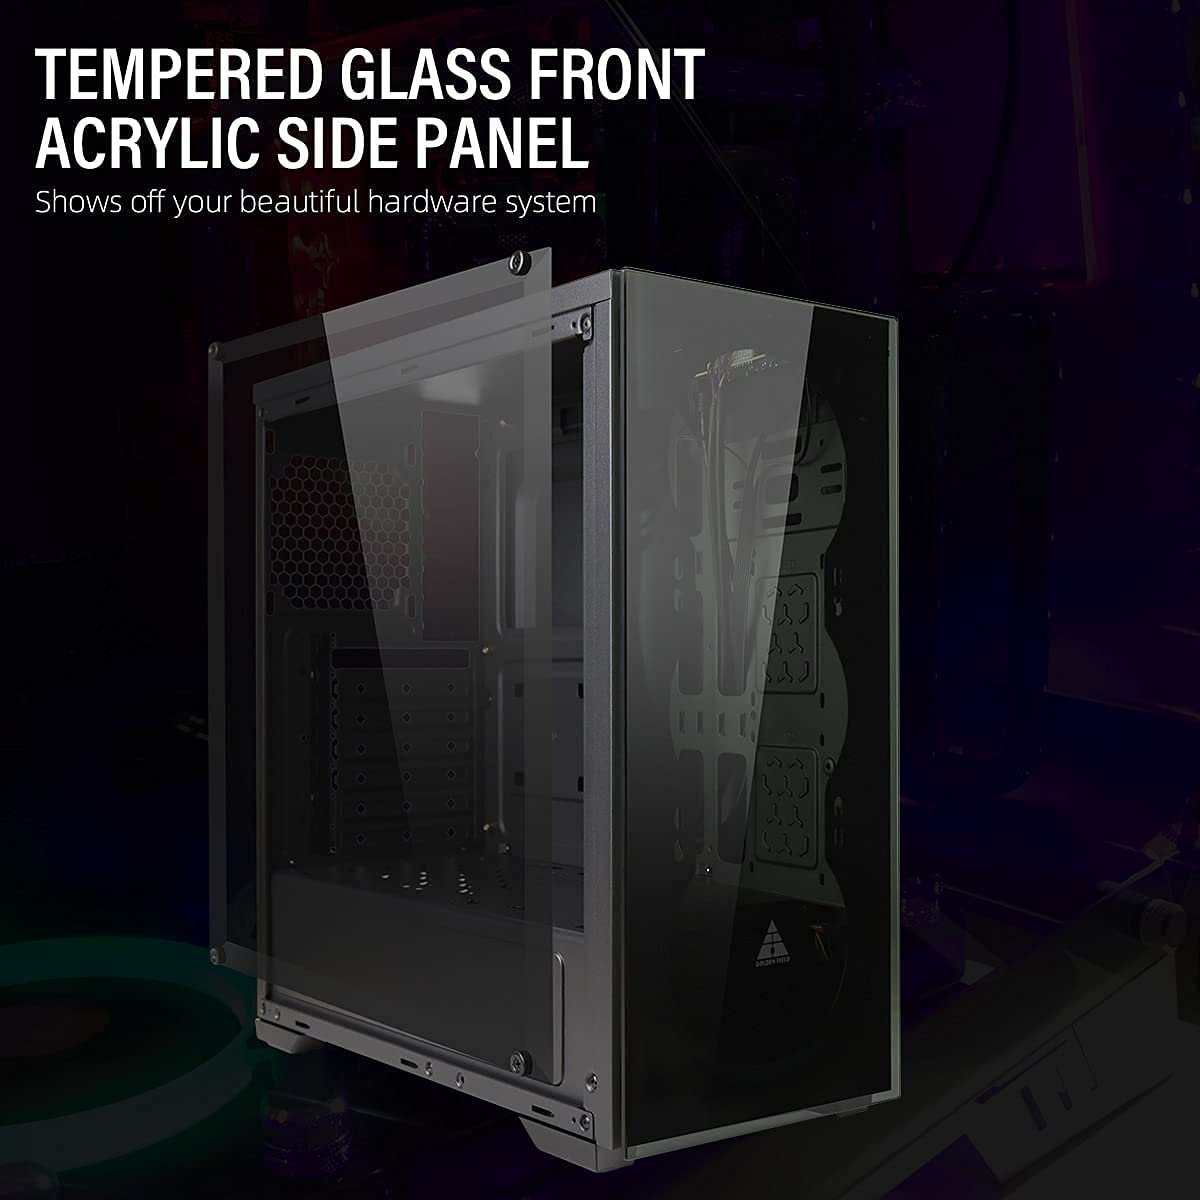 GOLDEN FIELD - N17 PC Case ATX/Micro ATX/ITX Computer Gaming PC Case With Acrylic Side Windows For Desktop Computer PC - Black